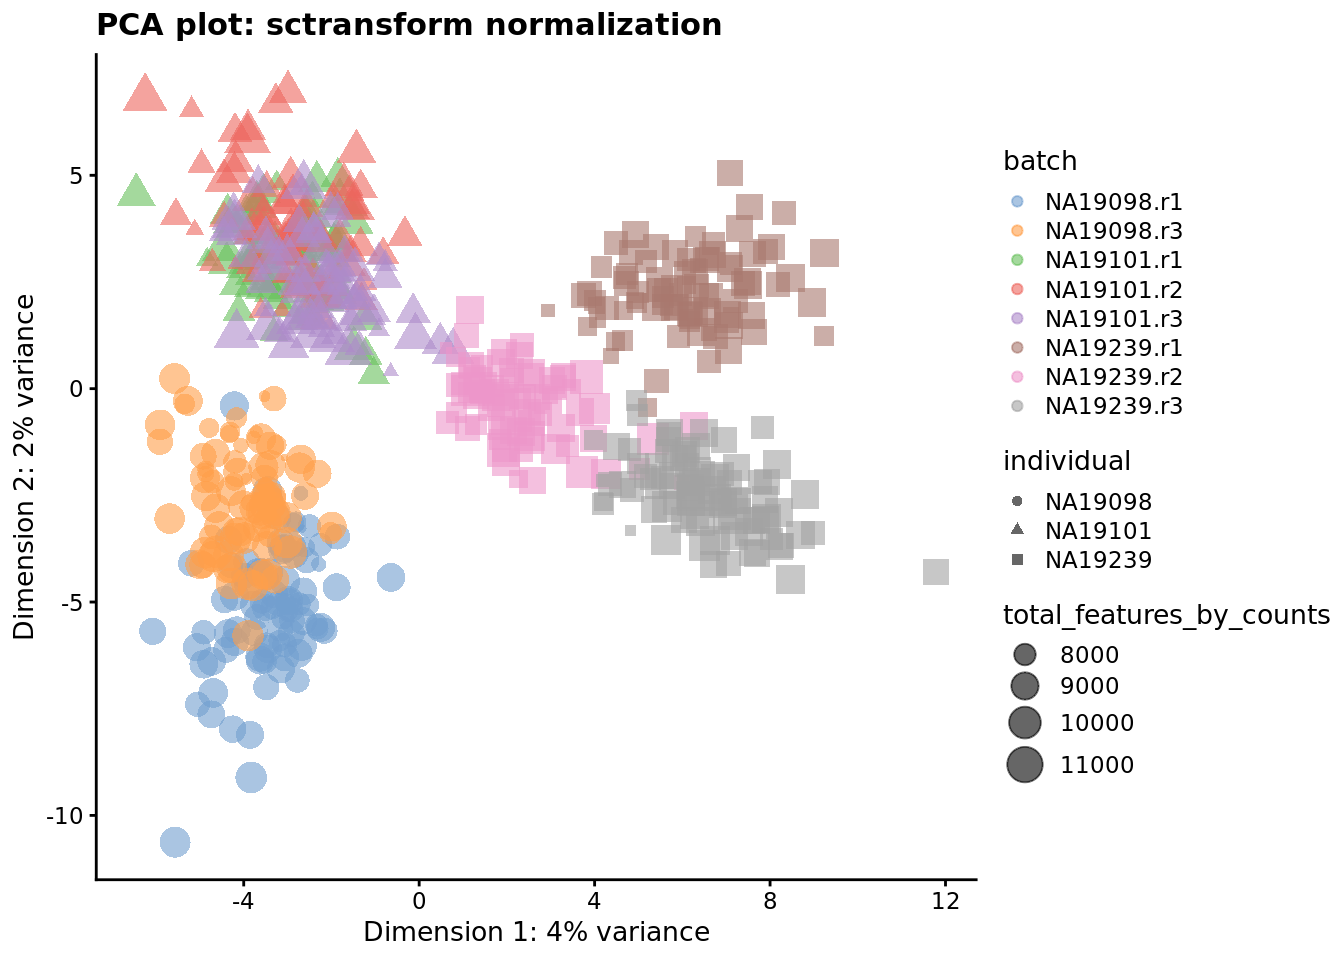 PCA plot of the tung data after sctransform normalisation (Pearson residuals).